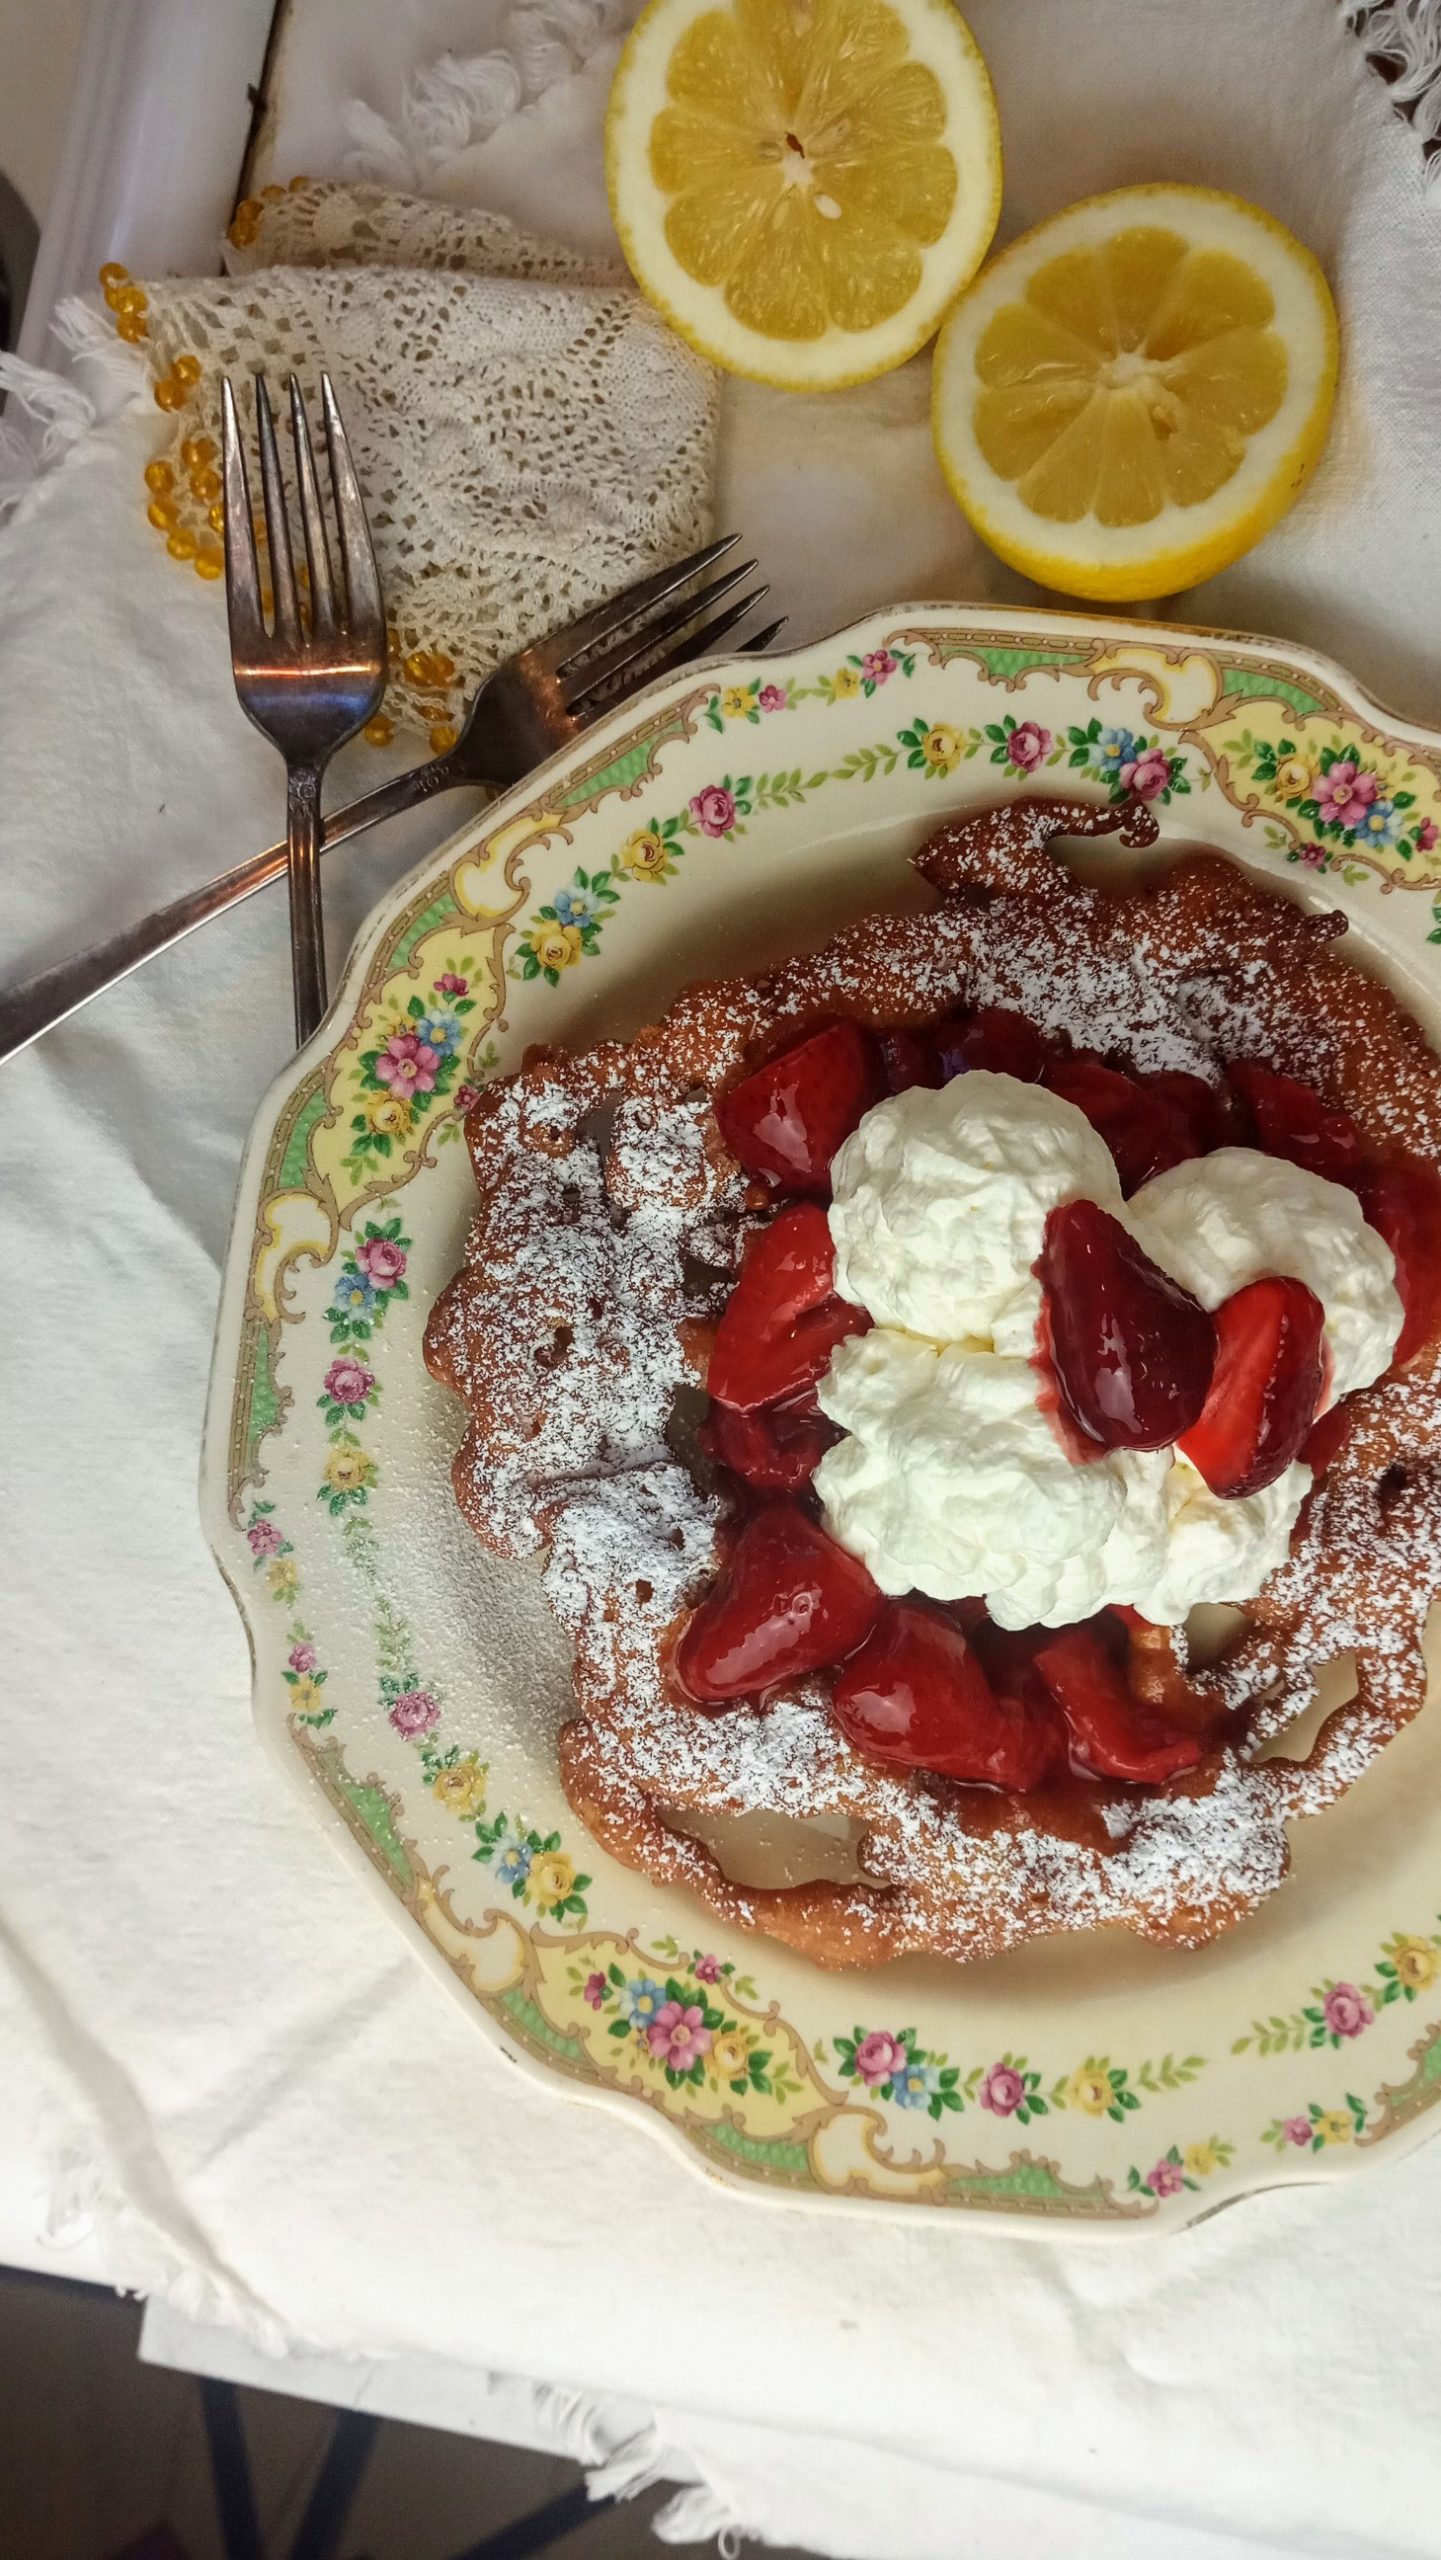 Cooking up fun with funnel cake